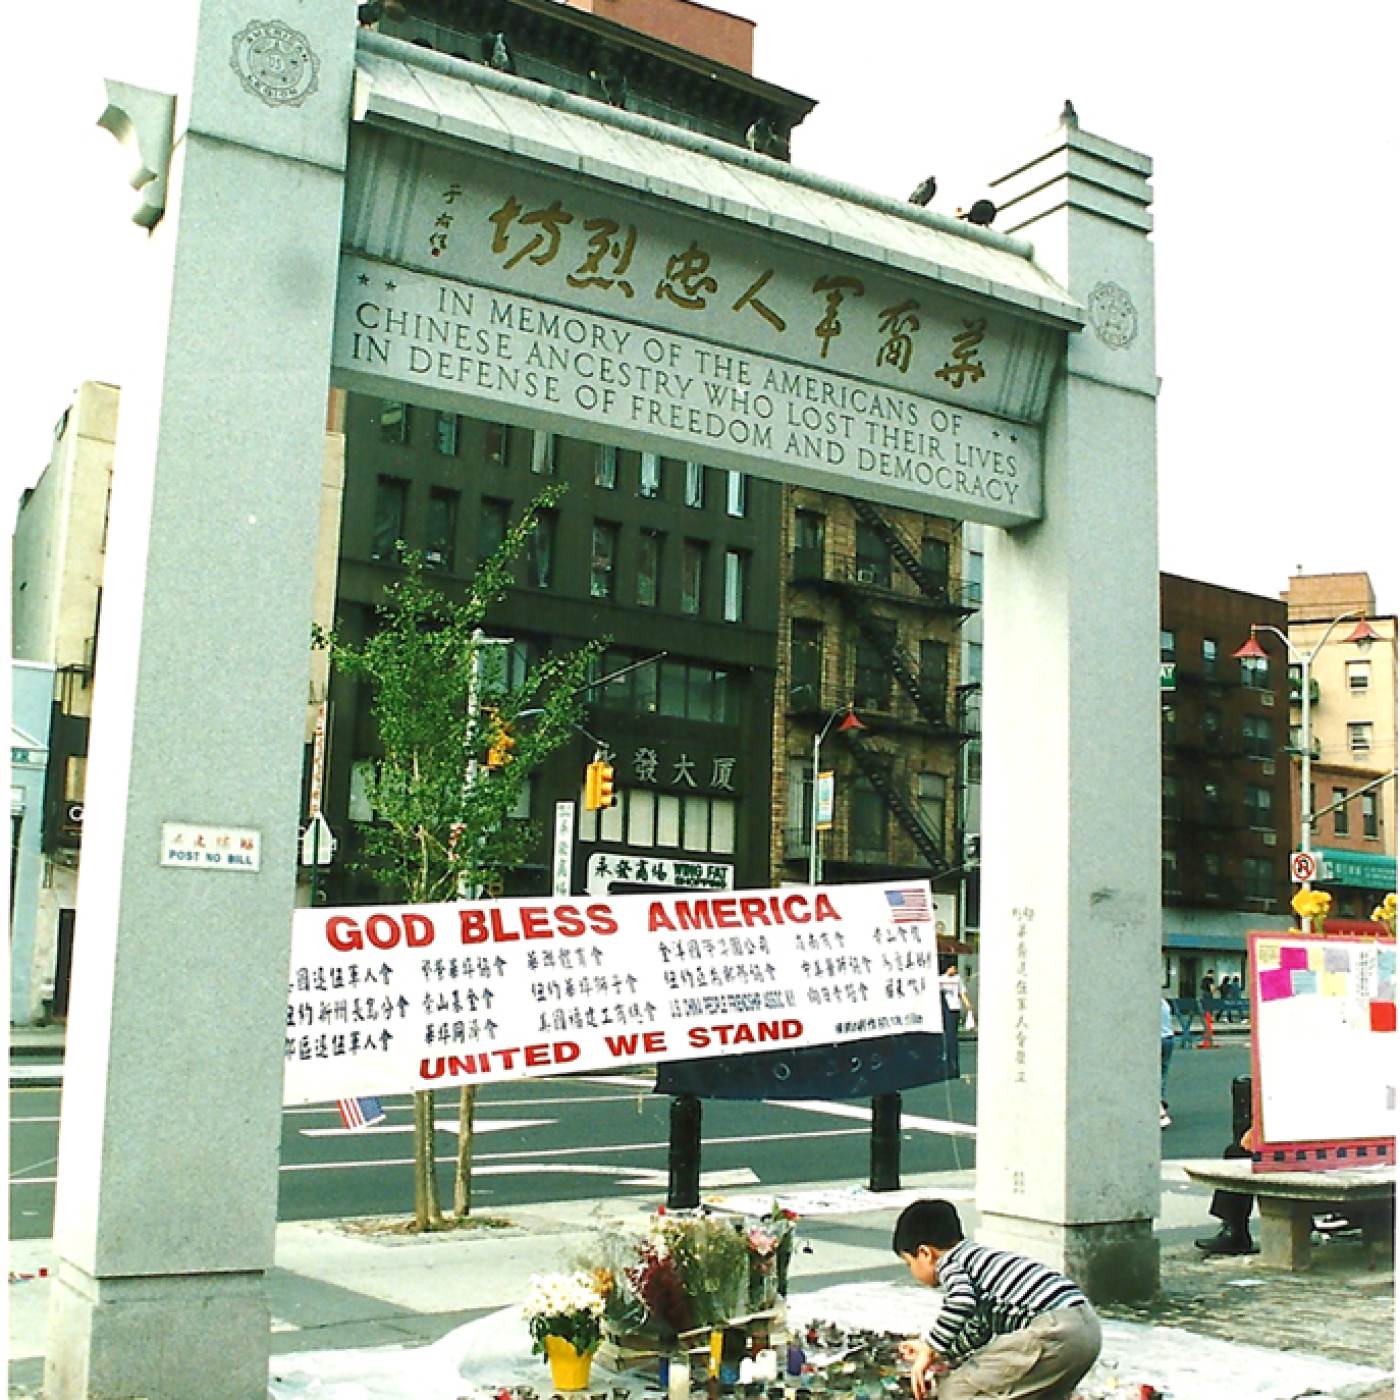 2002.014.003 9/11 memorial set up under the Kim Lau Memorial Arch in Chatham Square, 2001. Photograph taken by Lia Chang, Museum of Chinese in America (MOCA) Recovering Chinatown: 9/11 Collection.